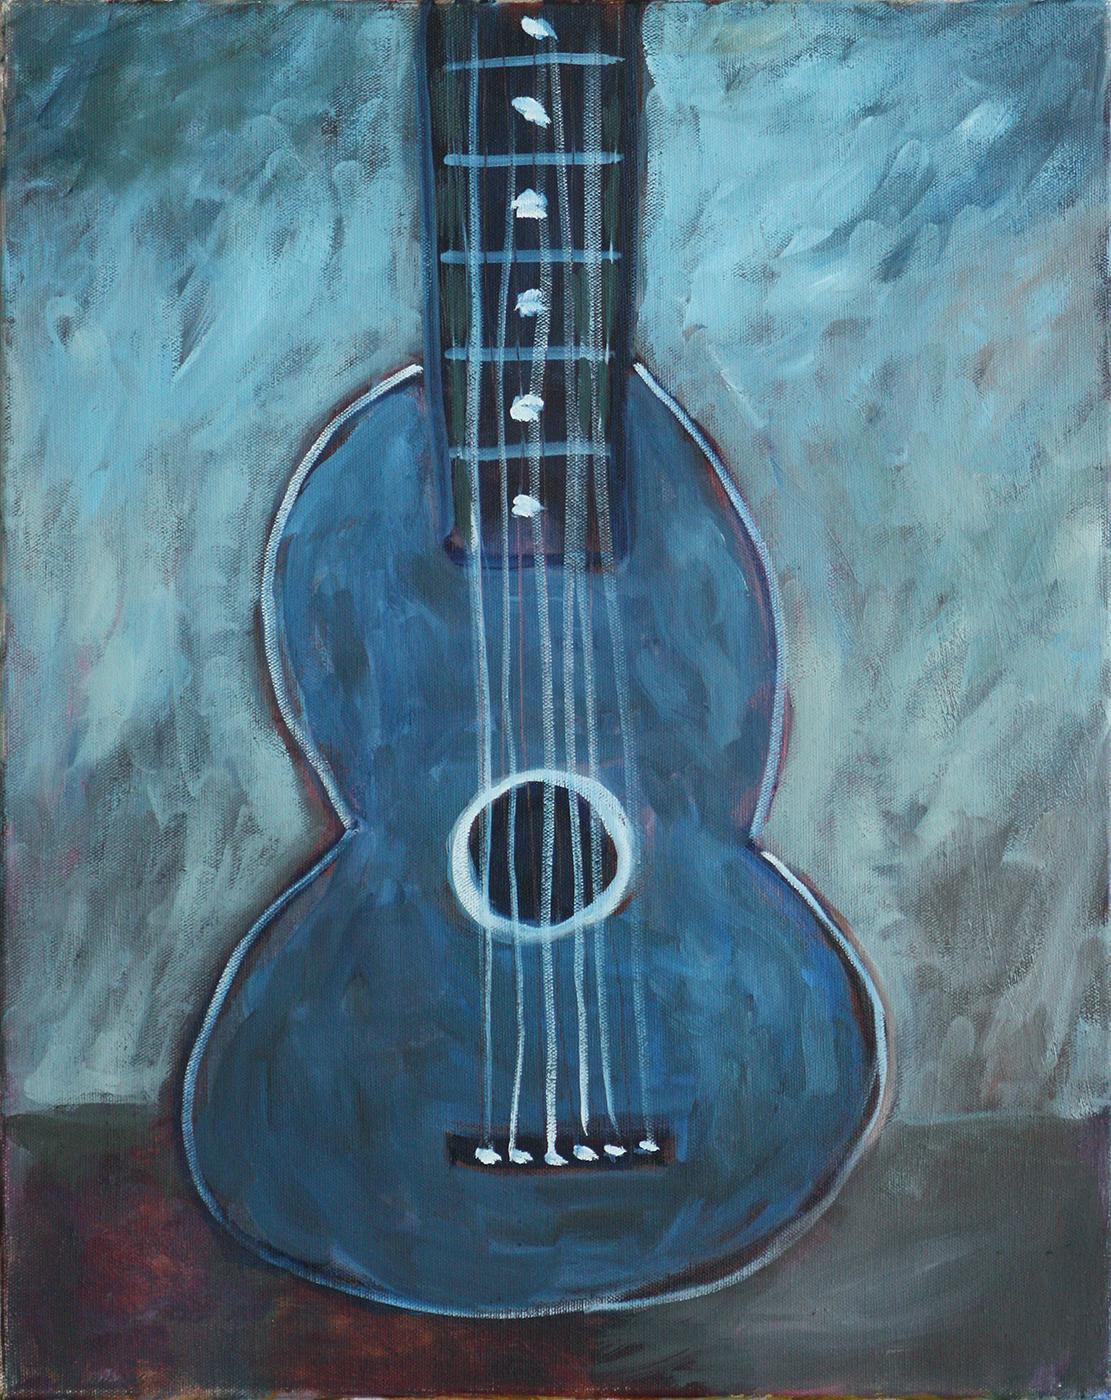 Kim Simmonds Still-Life Painting - "Untitled Picasso Guitar"   Acrylic on Canvas 22x18"